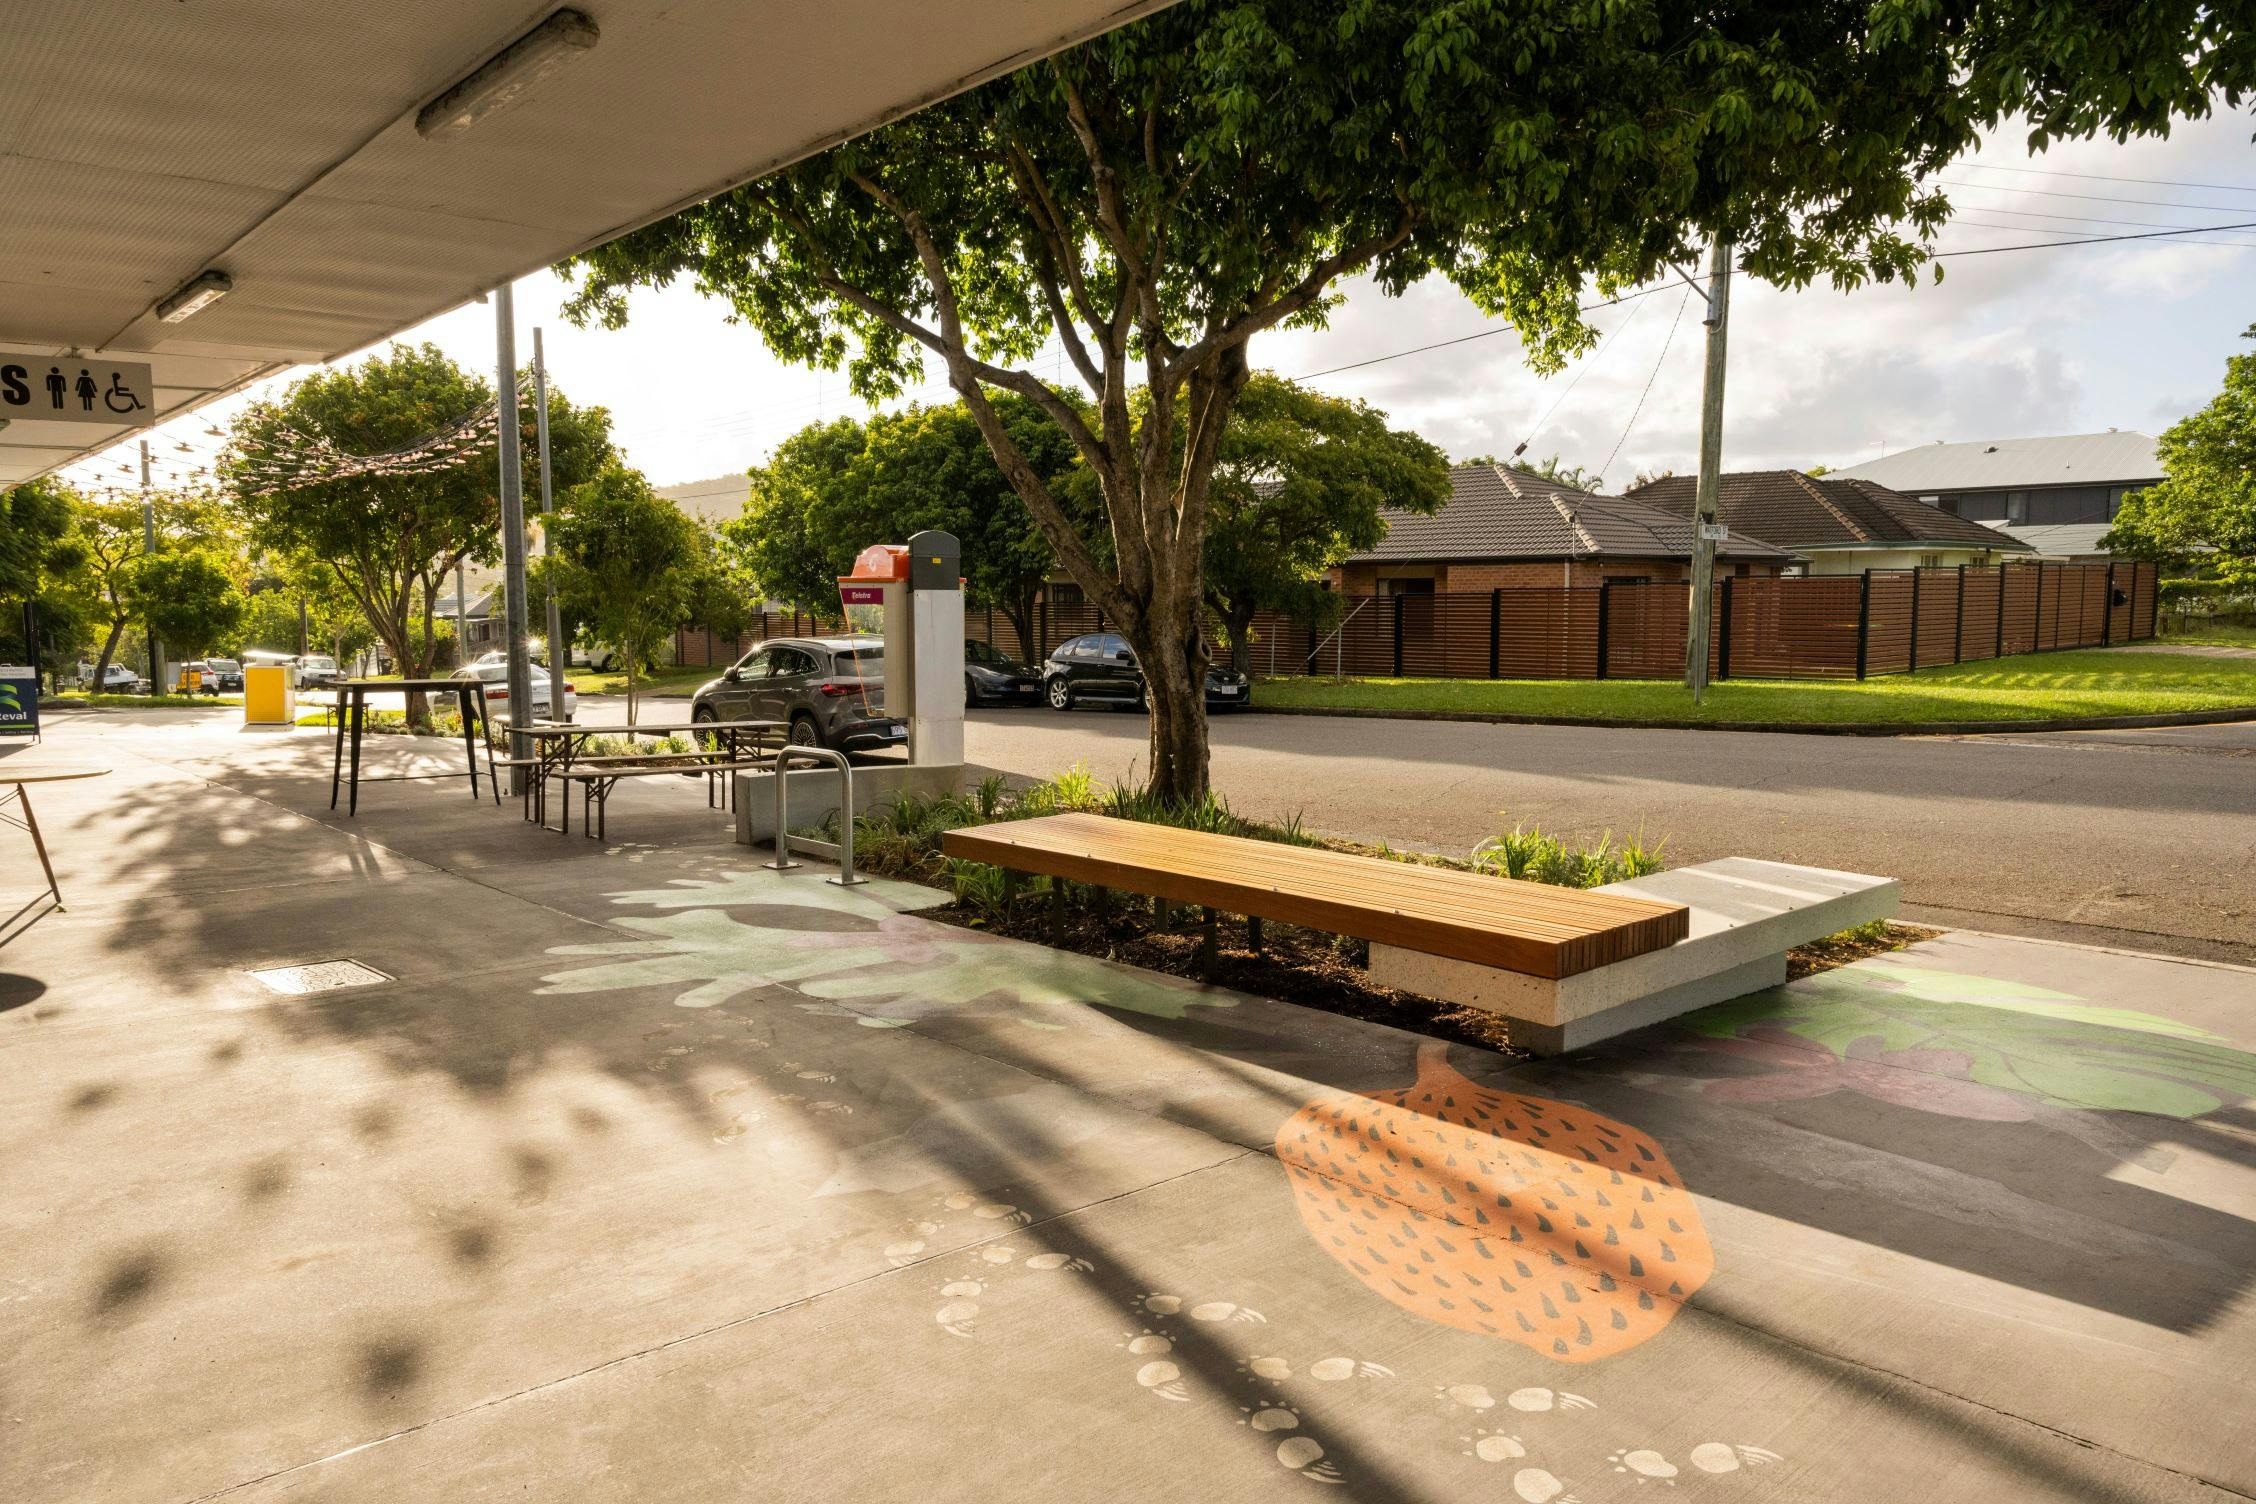 Seating area with new platform seat, planting bed, bike rack, accessible phone box and upgraded concrete footpath with colourful 'Echidna Magic' pavement design. 